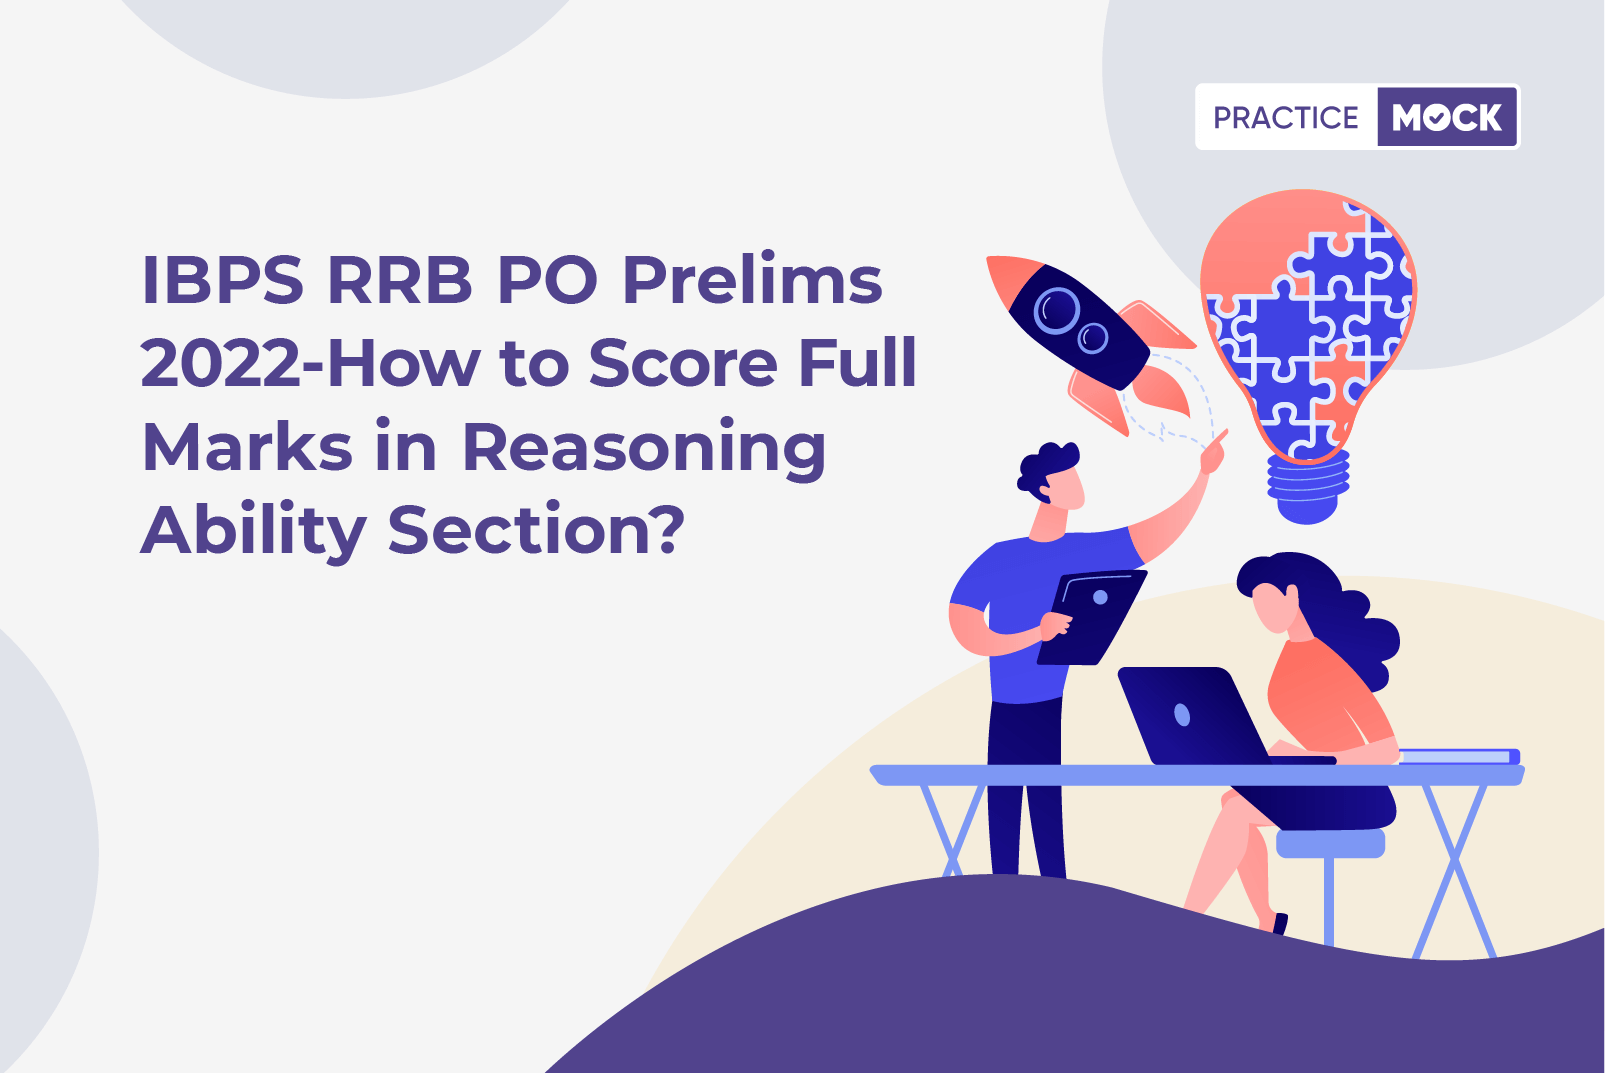 IBPS RRB PO Prelims 2022-How to score full marks in Reasoning Ability Section?